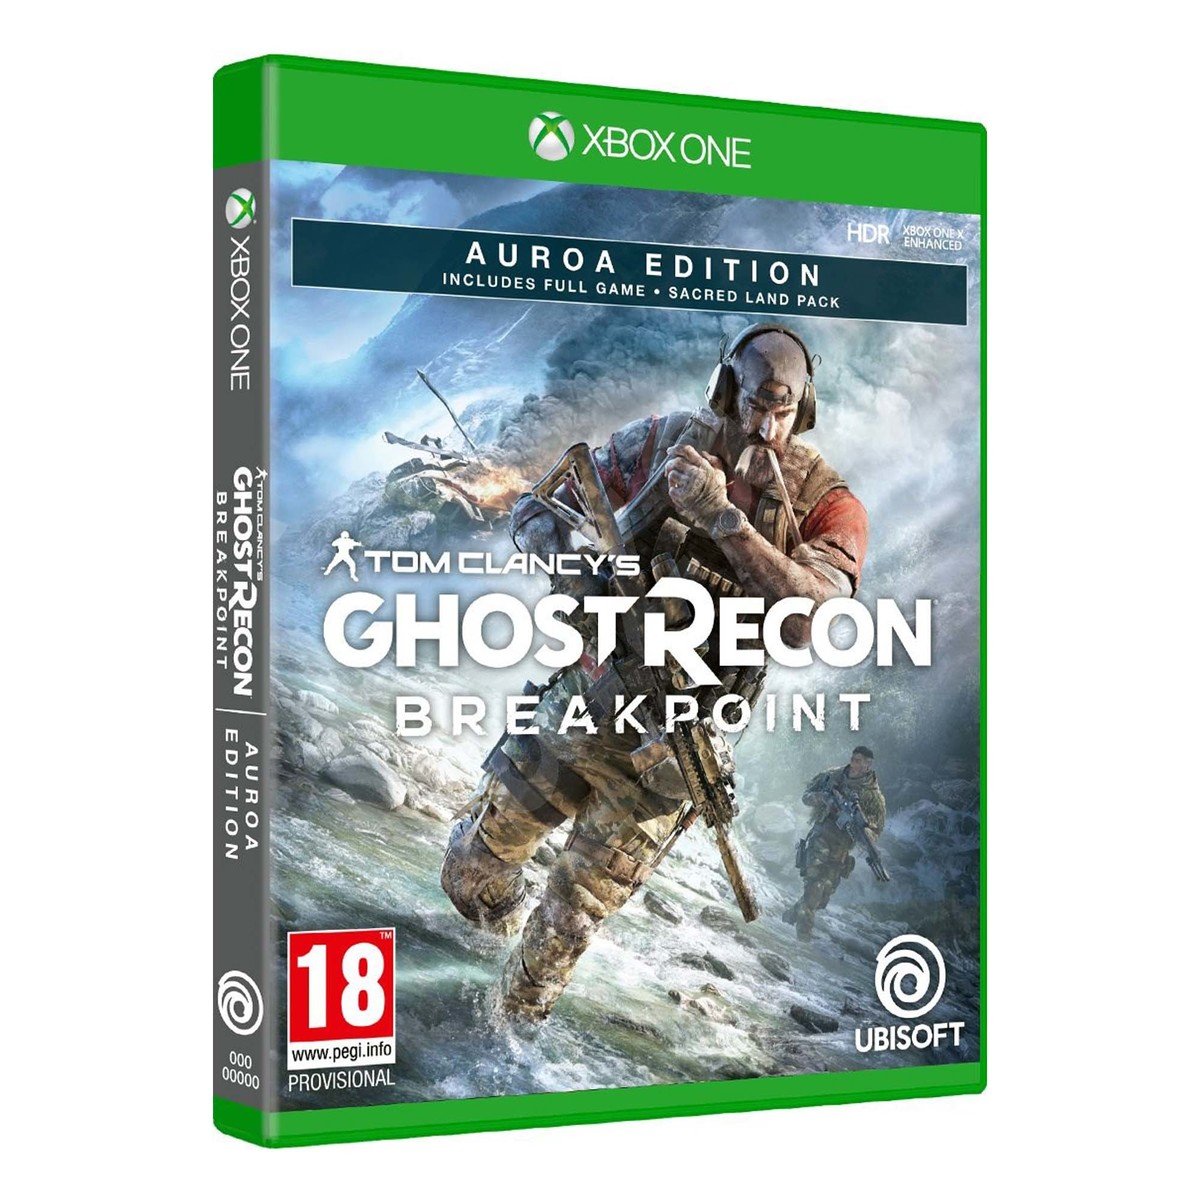 Ghost Recon Breakpoint Auroa Edition Xbox One